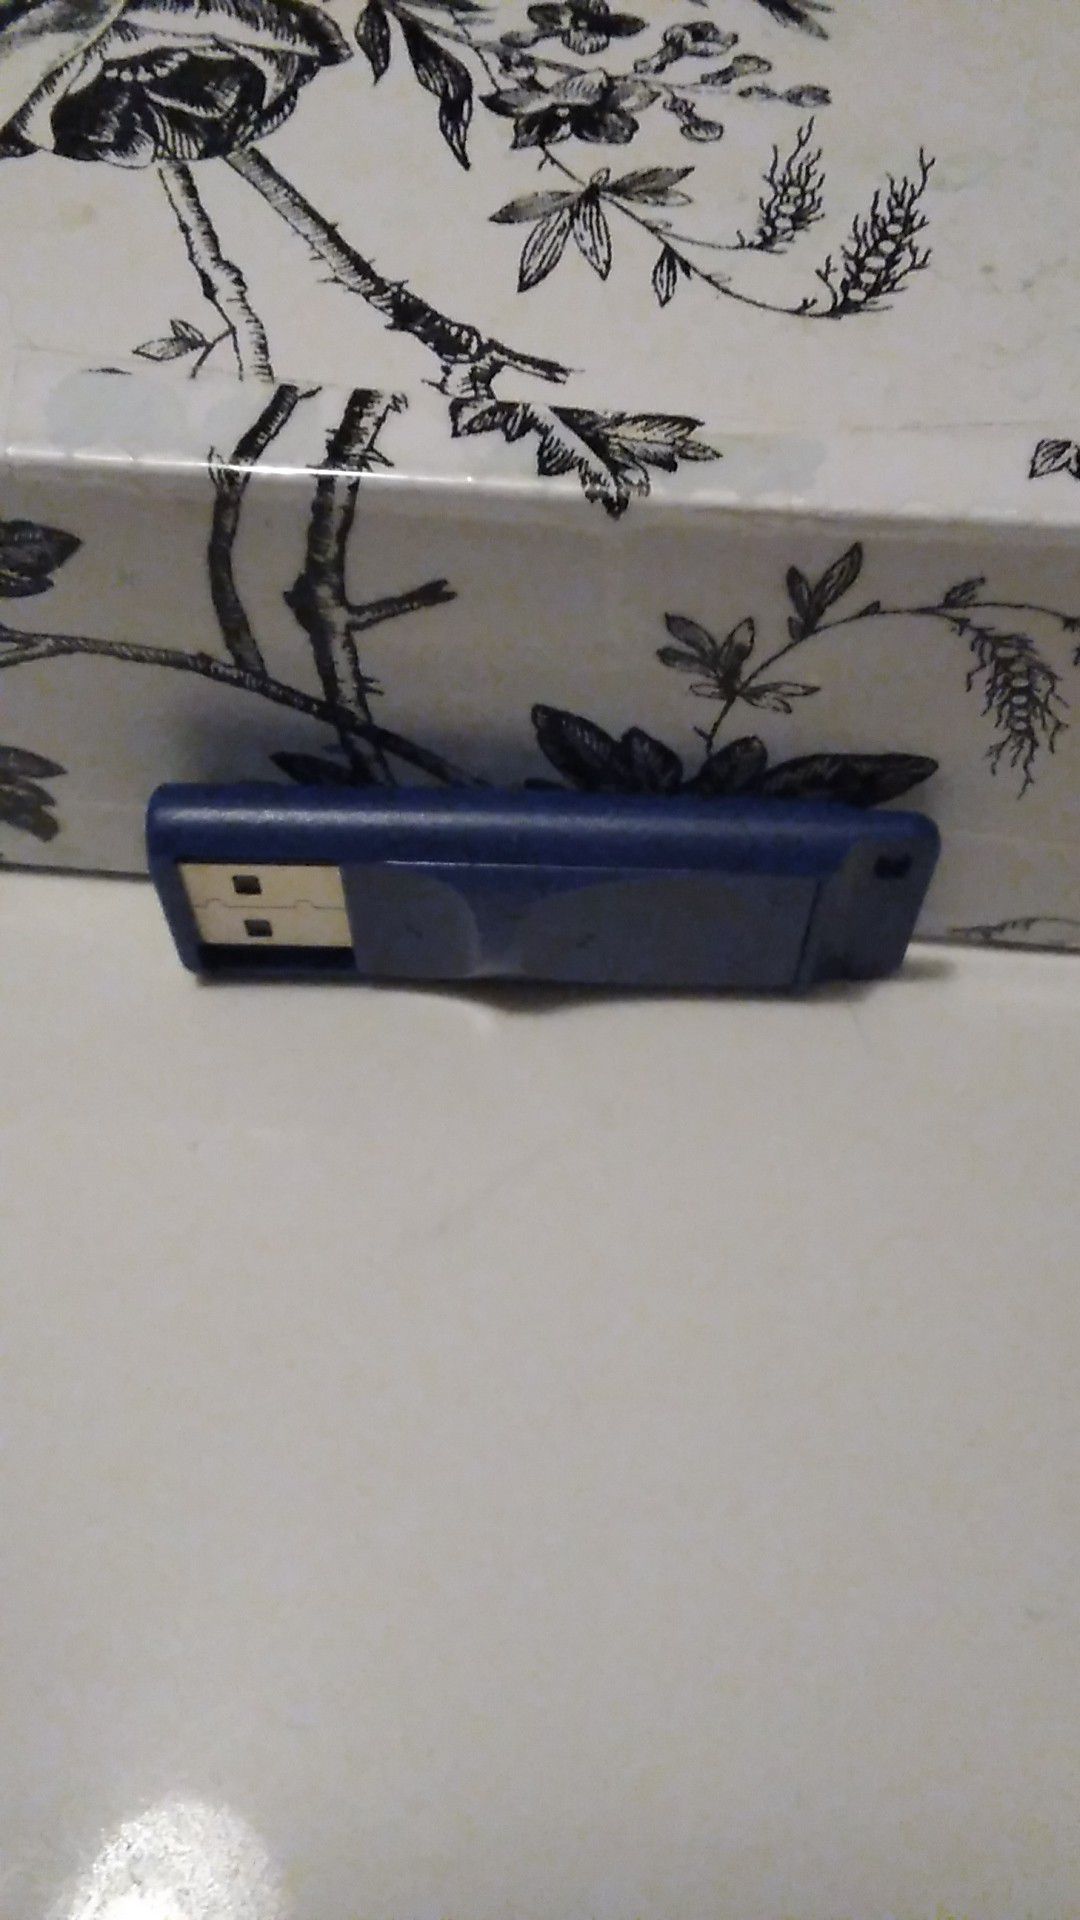 Flash drive never used.